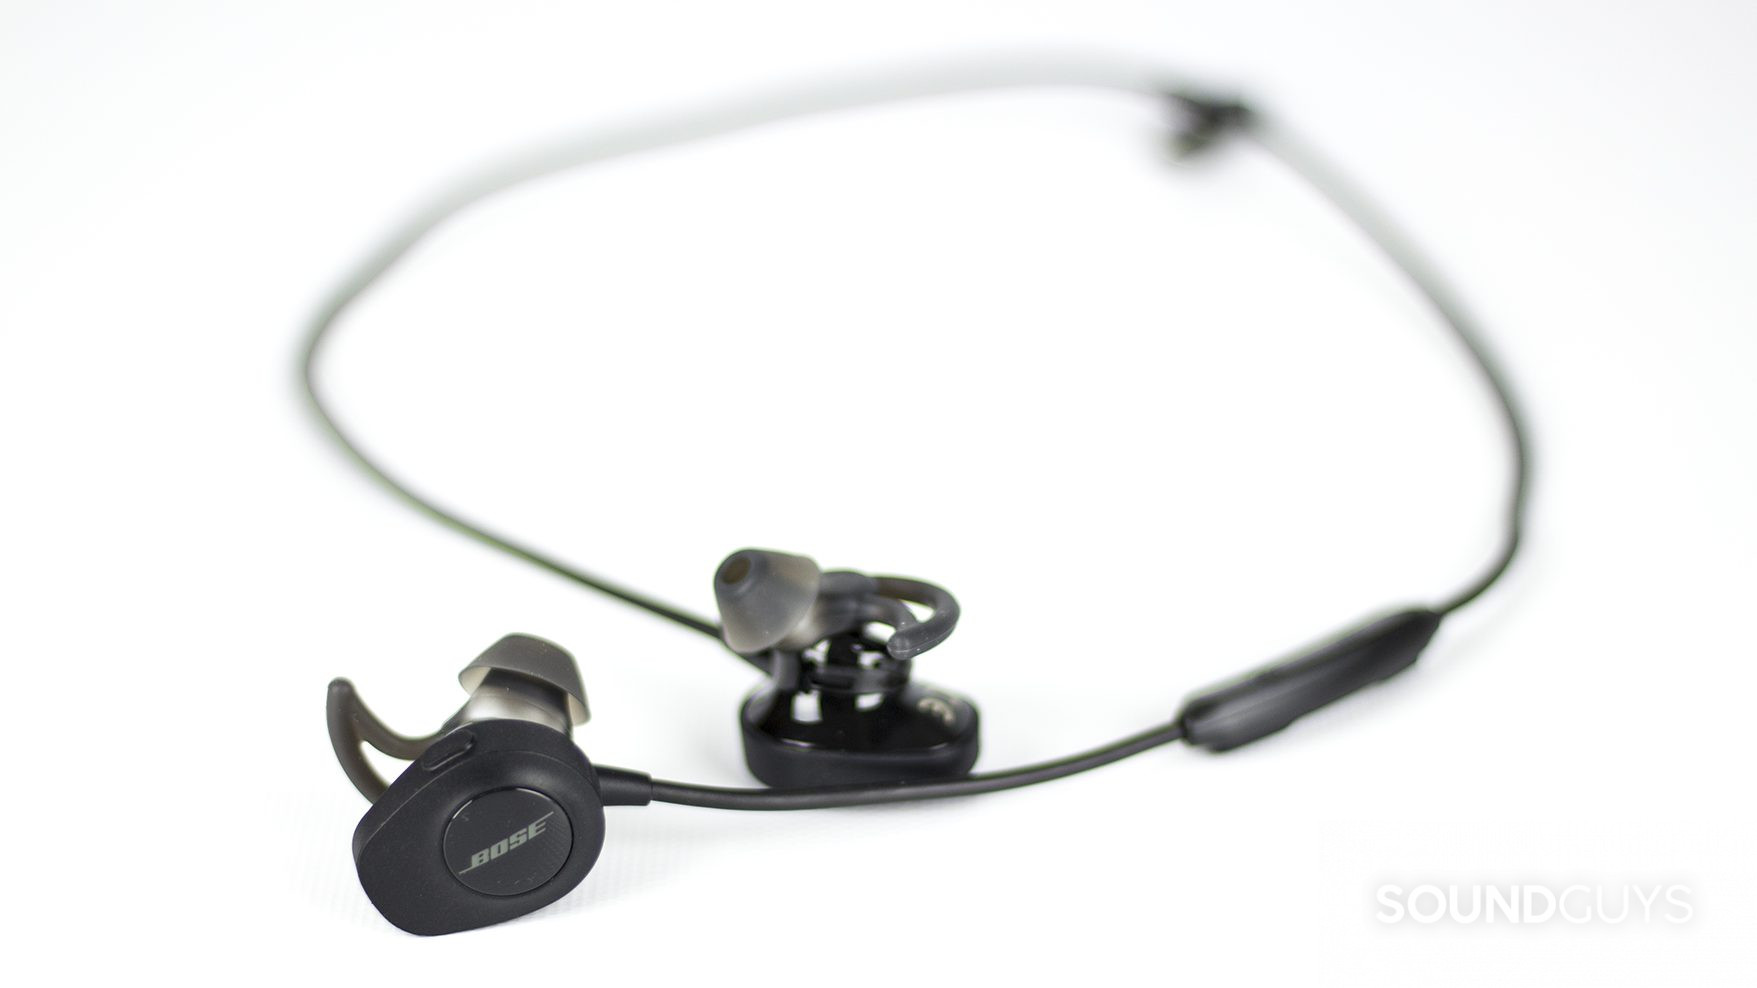 The Bose SoundSport Wireless in black against a white background with the whole product in view.